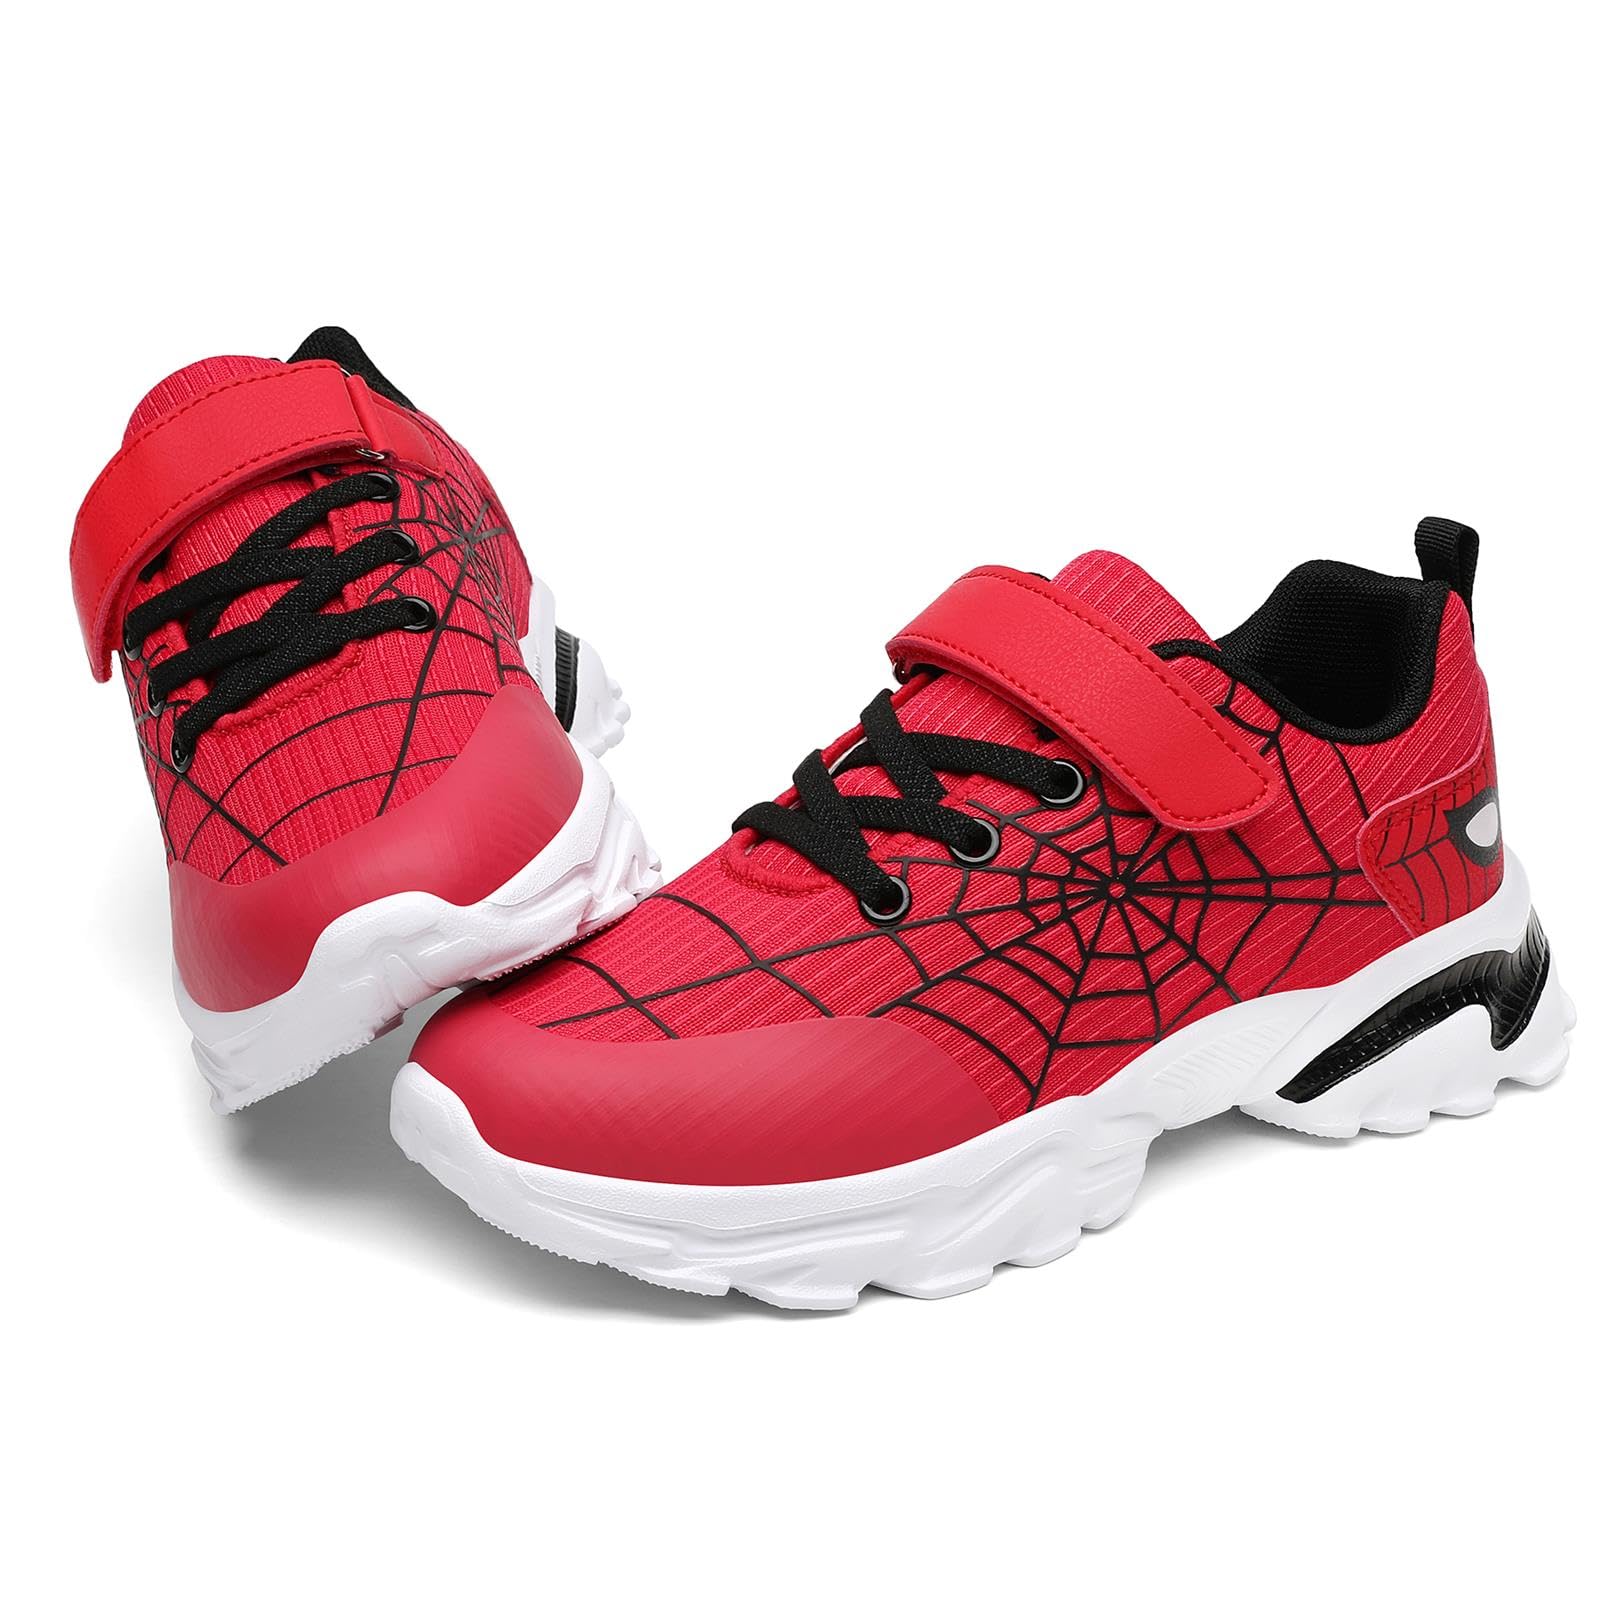 Wolidio Little/Big Kids Boys Girls Sneakers Lightweight Running Tennis Shoes Breathable Sport Athletic Fitness & Cross-Training Shoes